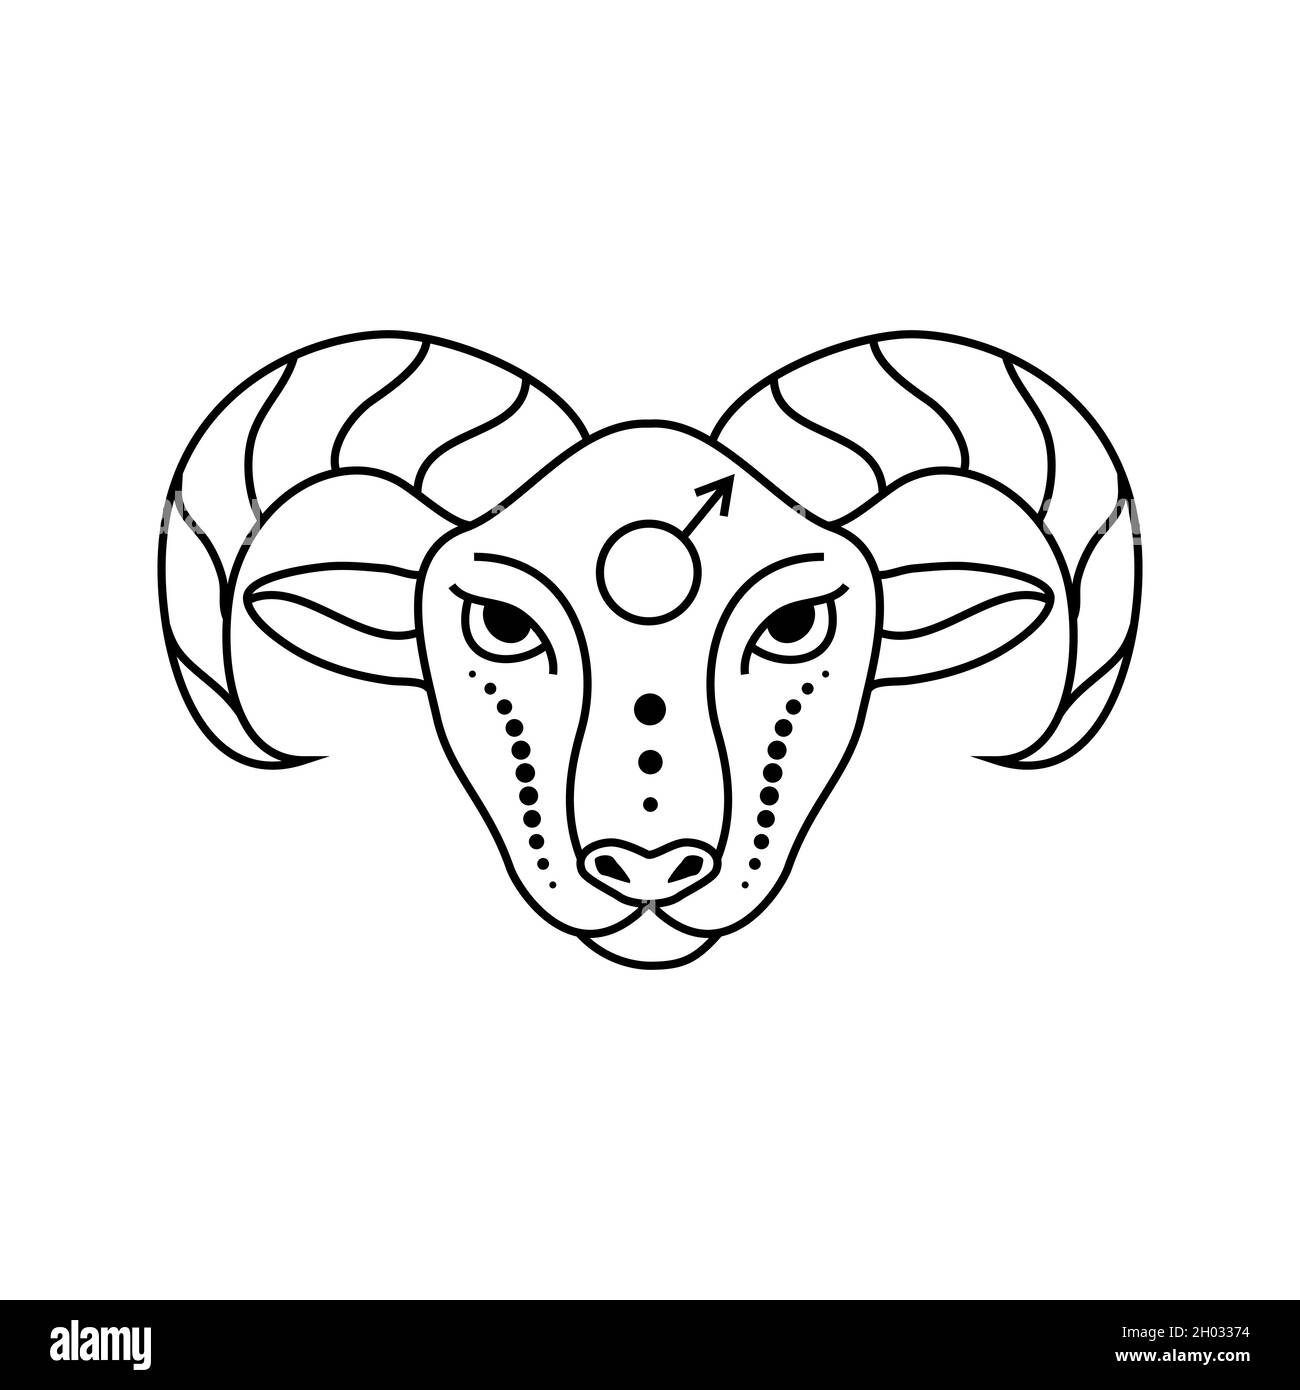 Horoscope aries Cut Out Stock Images & Pictures - Alamy